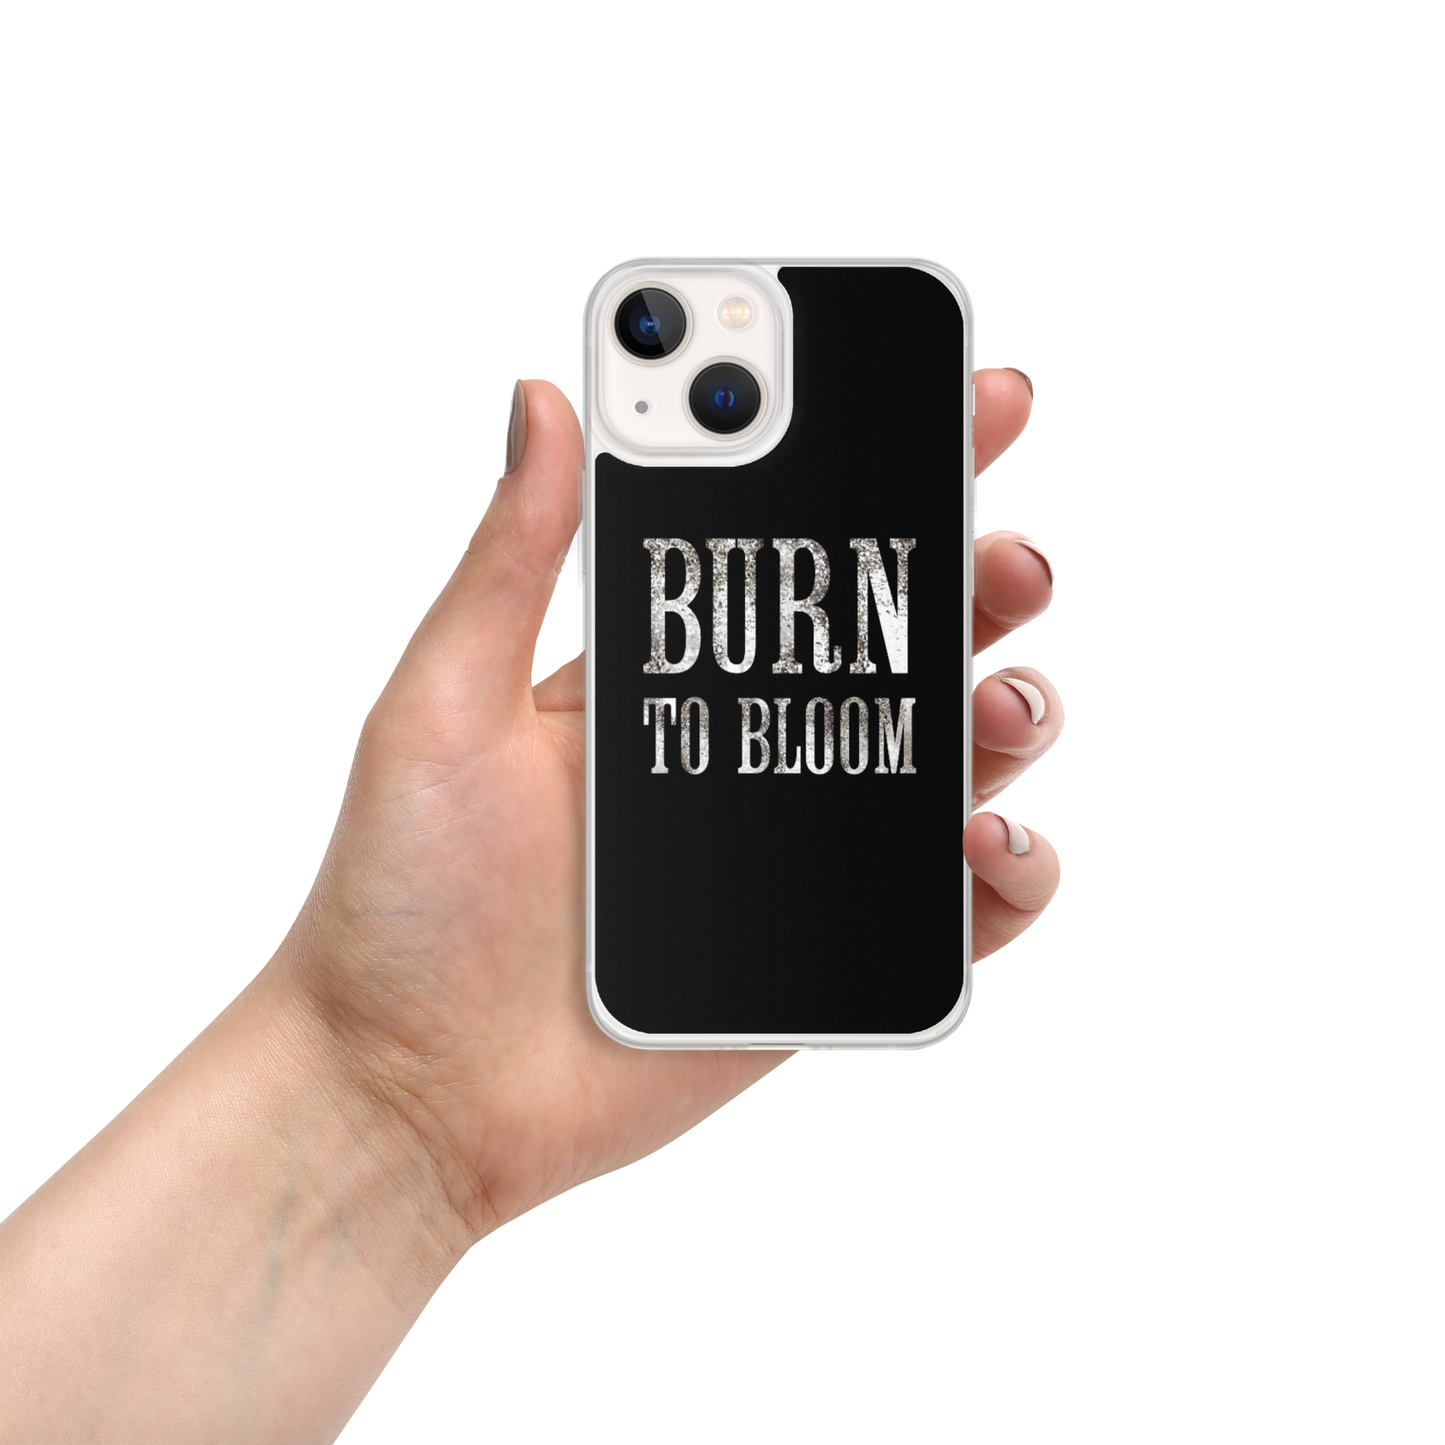 Burn to Bloom - iPhone Case